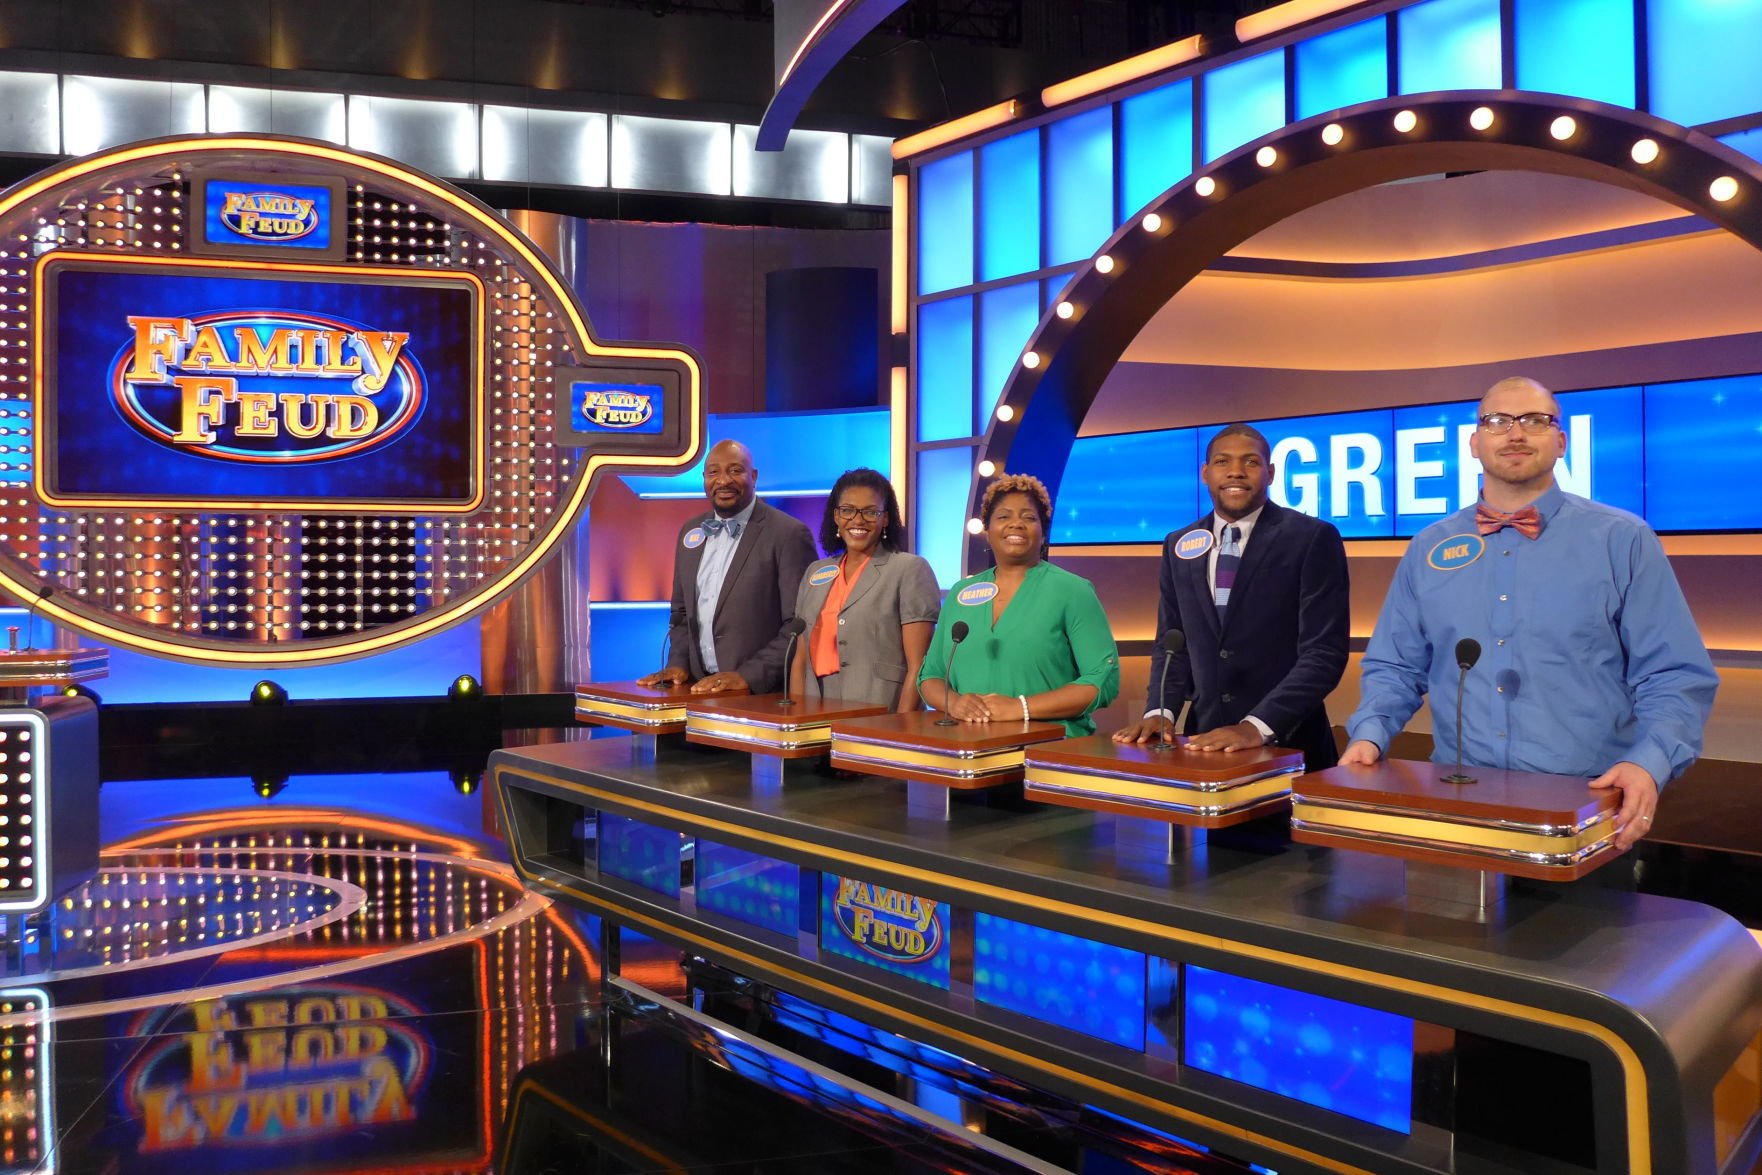 the cw family feud full episodes